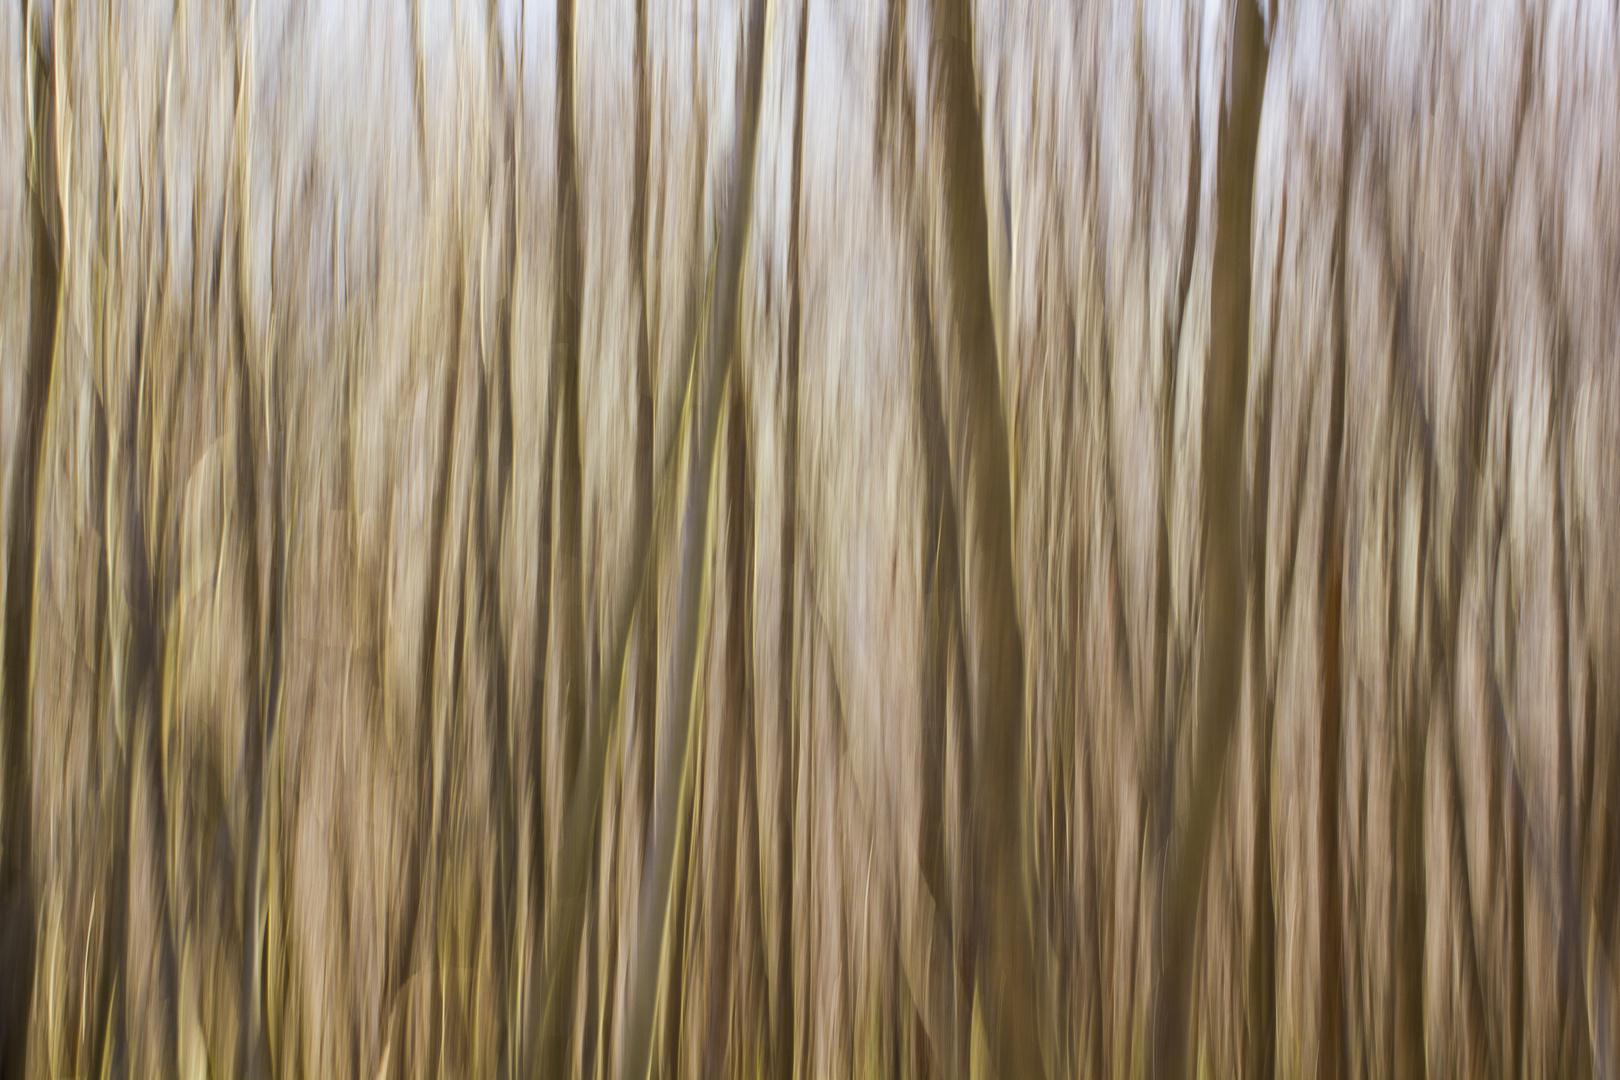 Stripes of woods